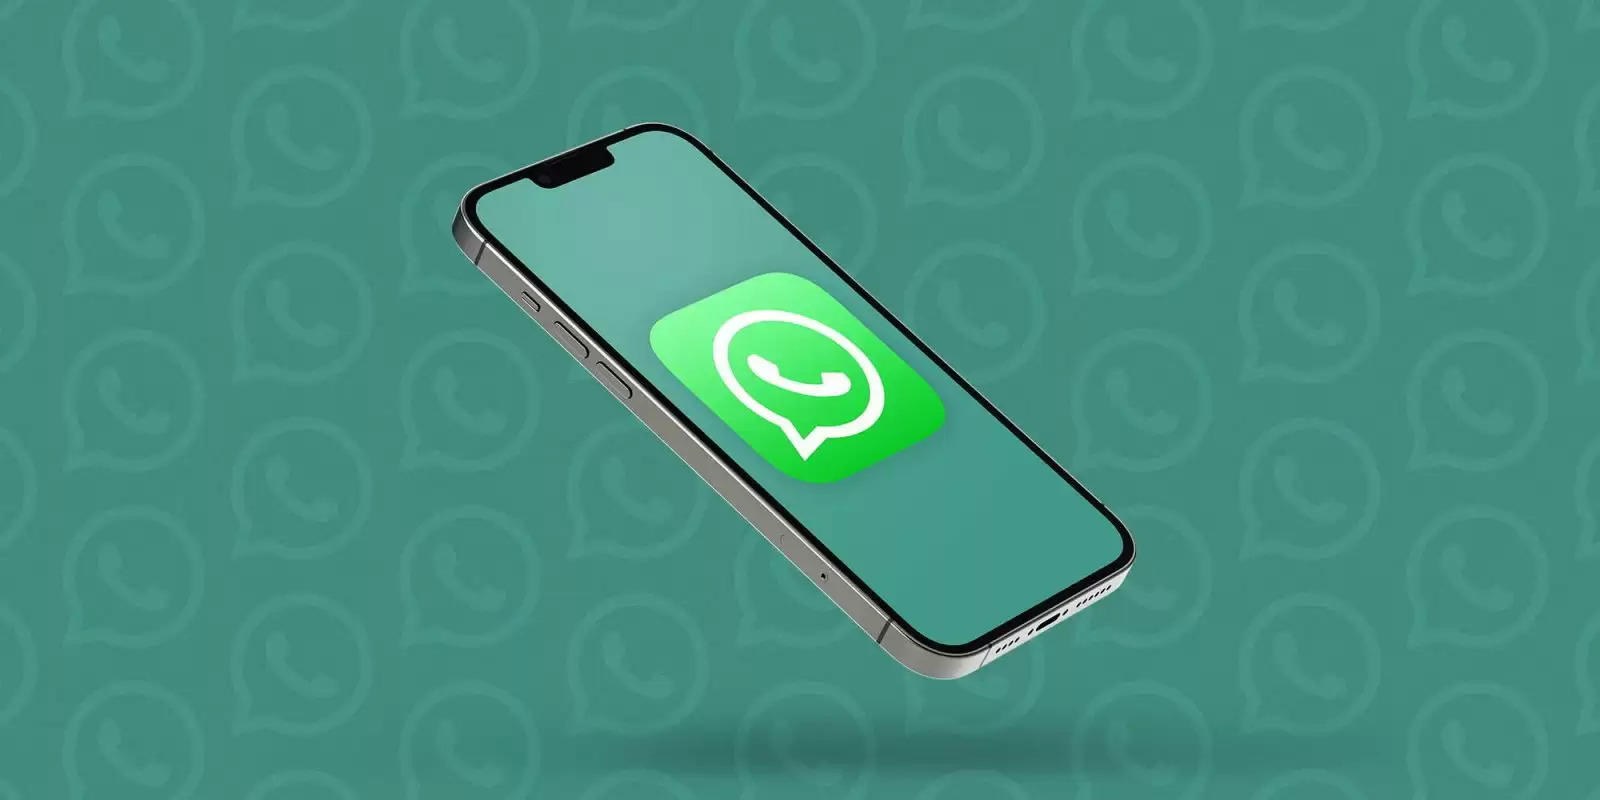 The iOS beta version of WhatsApp enables users to exchange higher-quality videos.